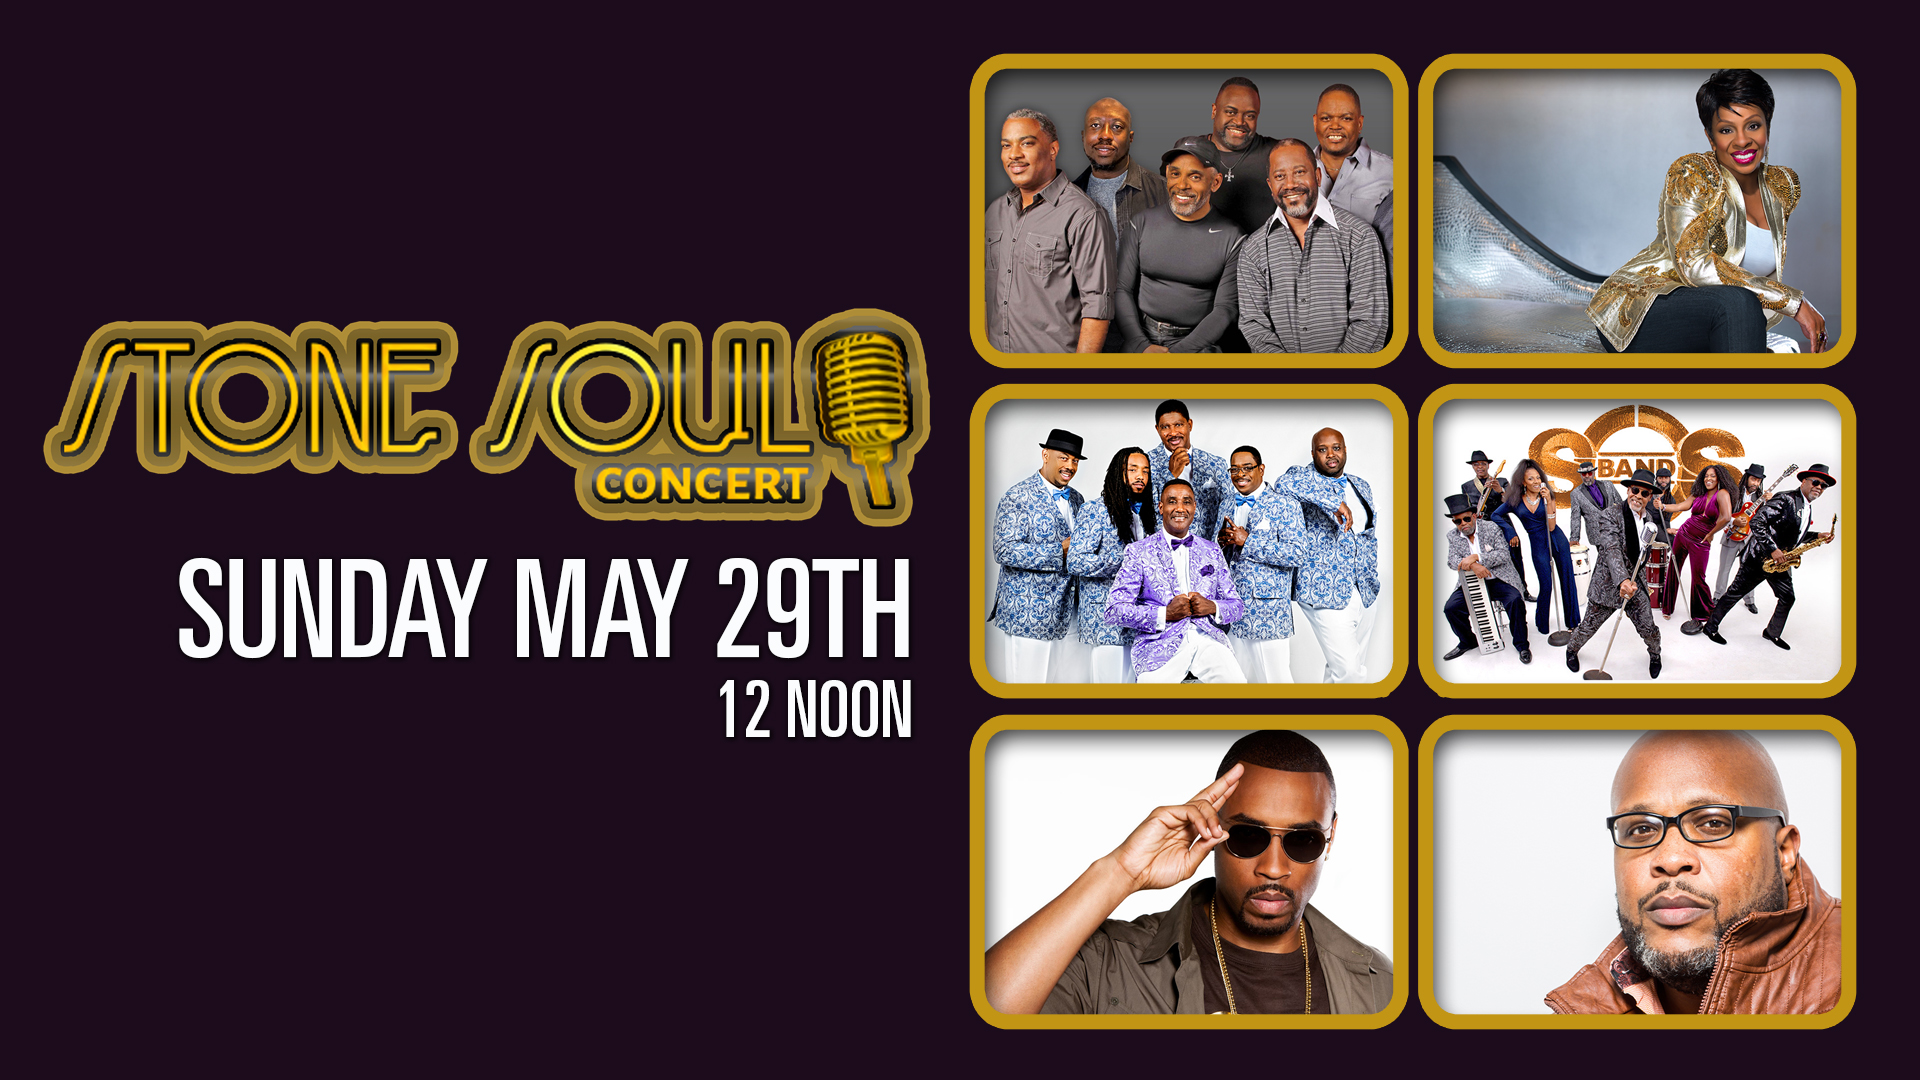 Stone Soul Concert at Concord Pavilion on Sun, May 29th, 2022 1200 pm